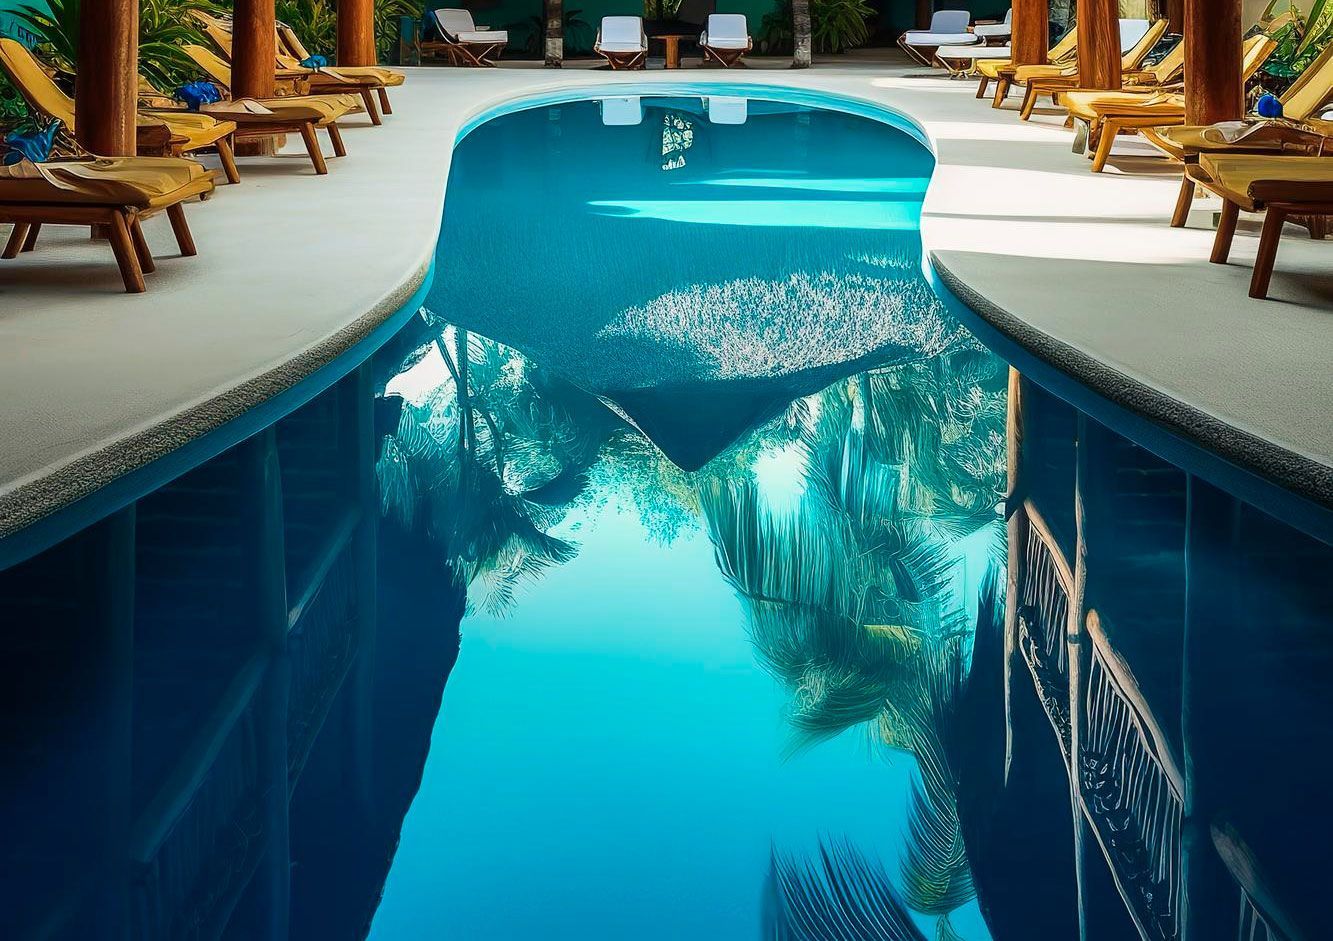 10 Stunning Pool Designs That Will Leave You Inspired